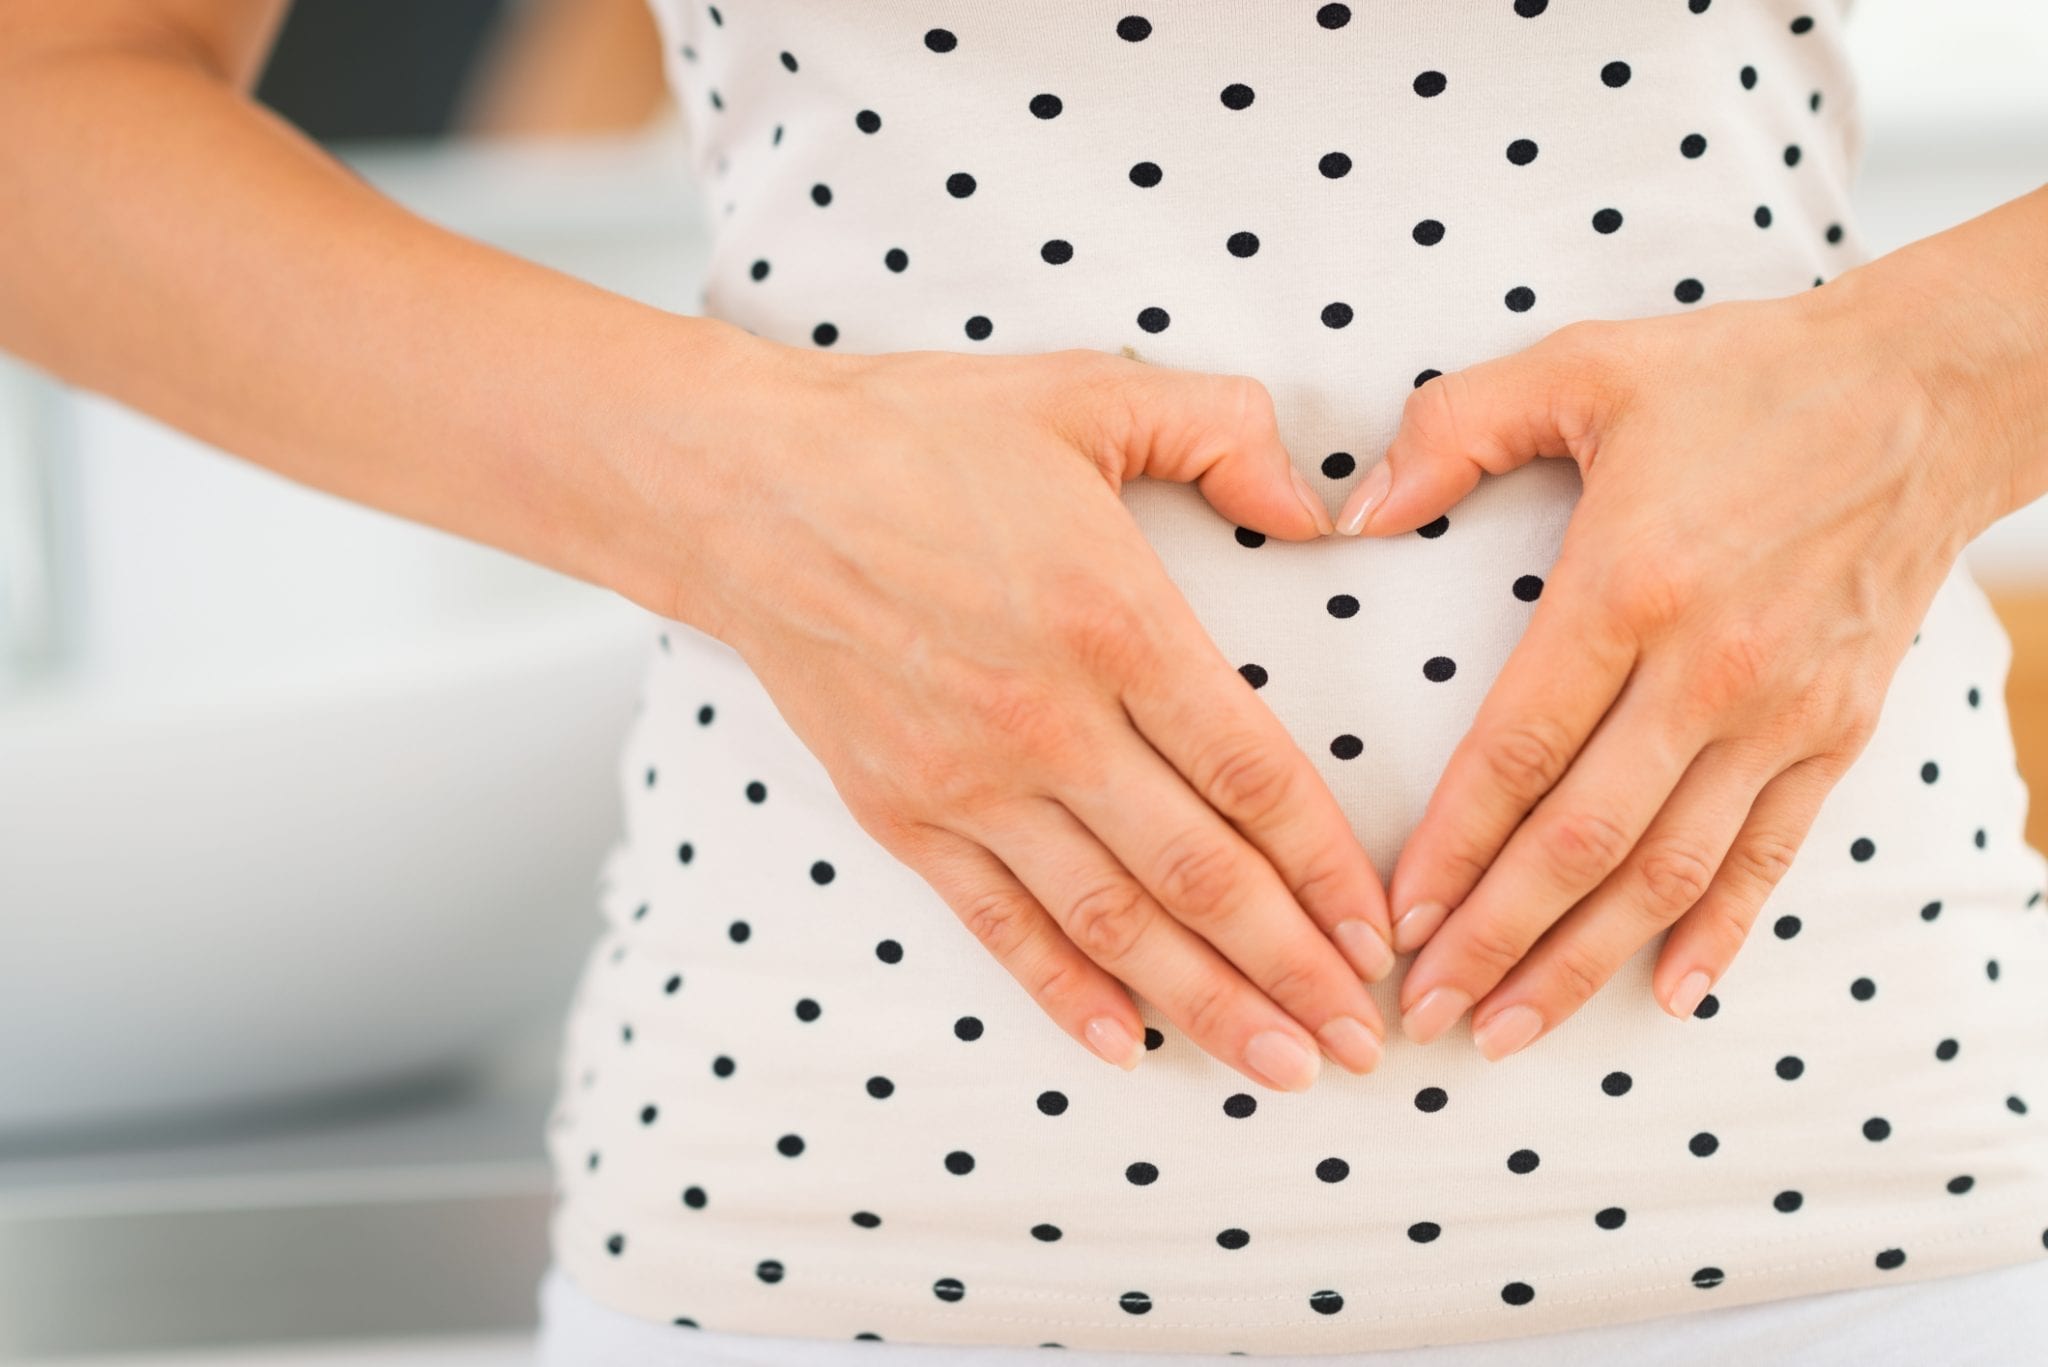 How to Keep Your Pregnancy a Secret in the First Trimester